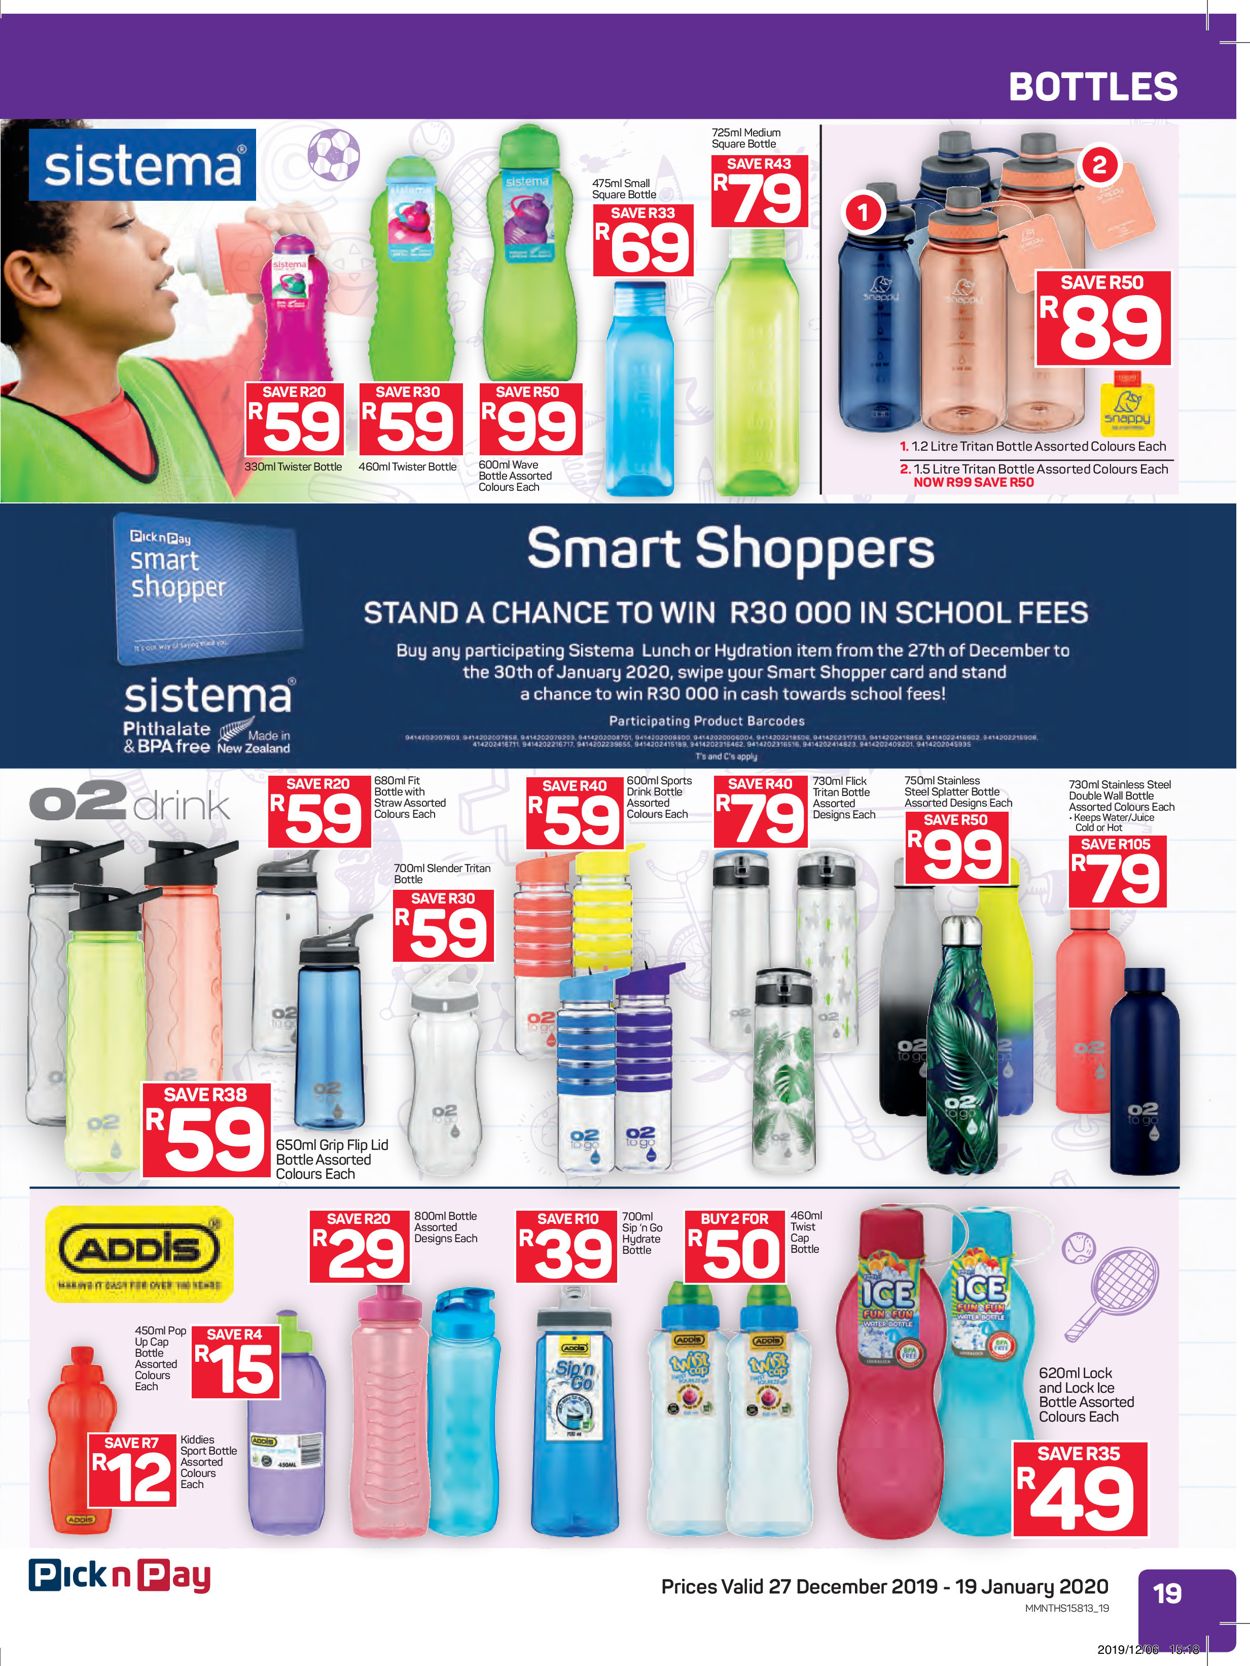 Pick n Pay Back 2 School Catalogue - 2019/12/27-2020/01/19 (Page 20)